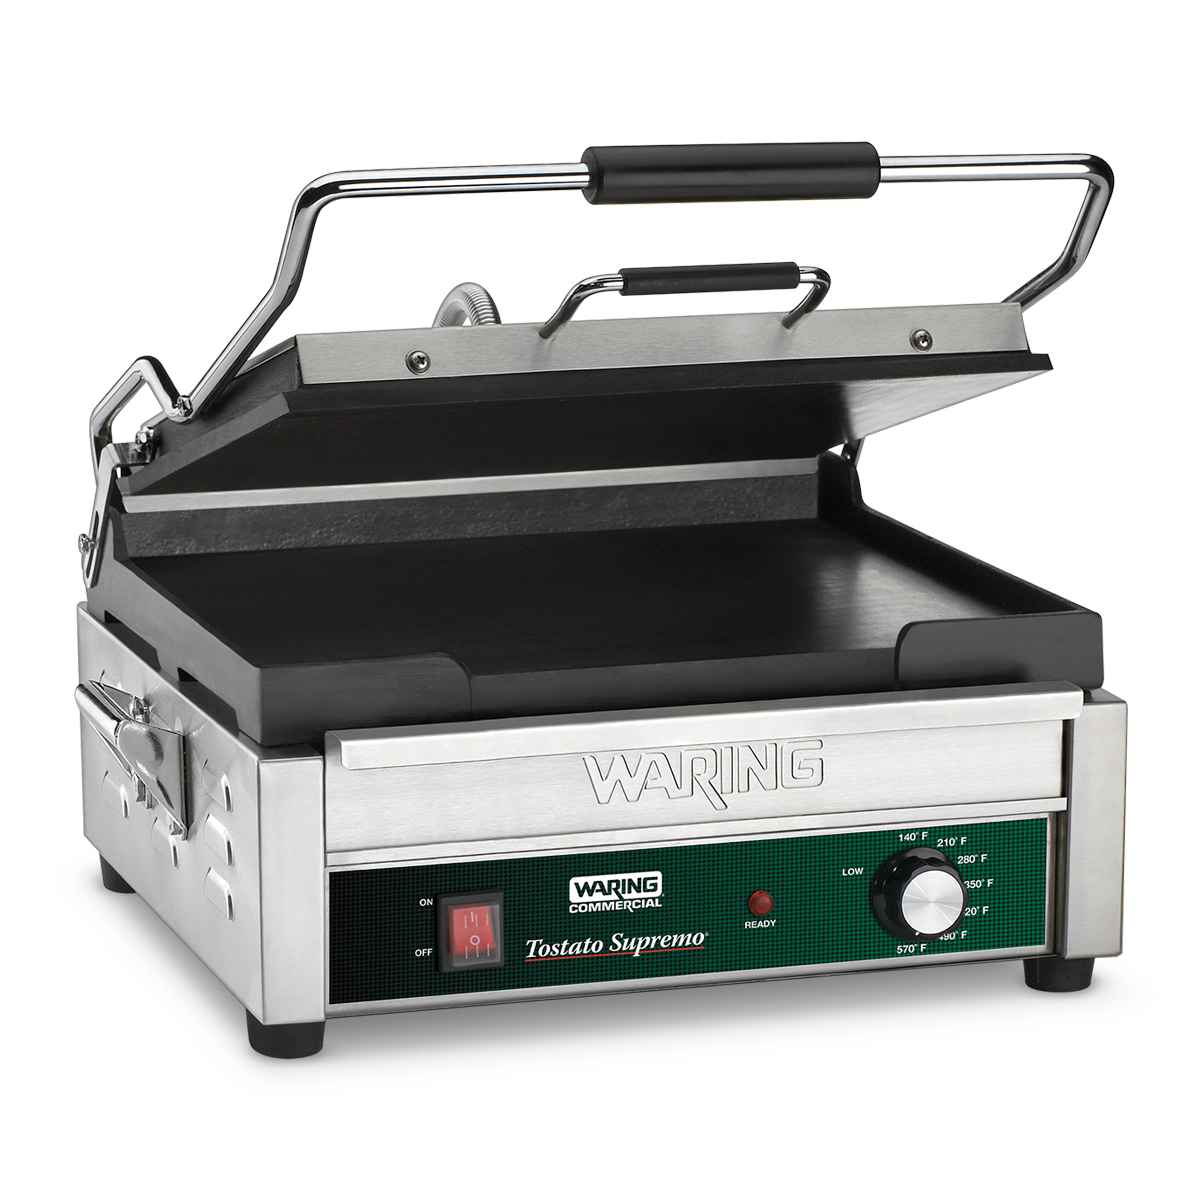 https://www.waringcommercialproducts.com/files/products/wfg250-waring-flat-grill-main.png